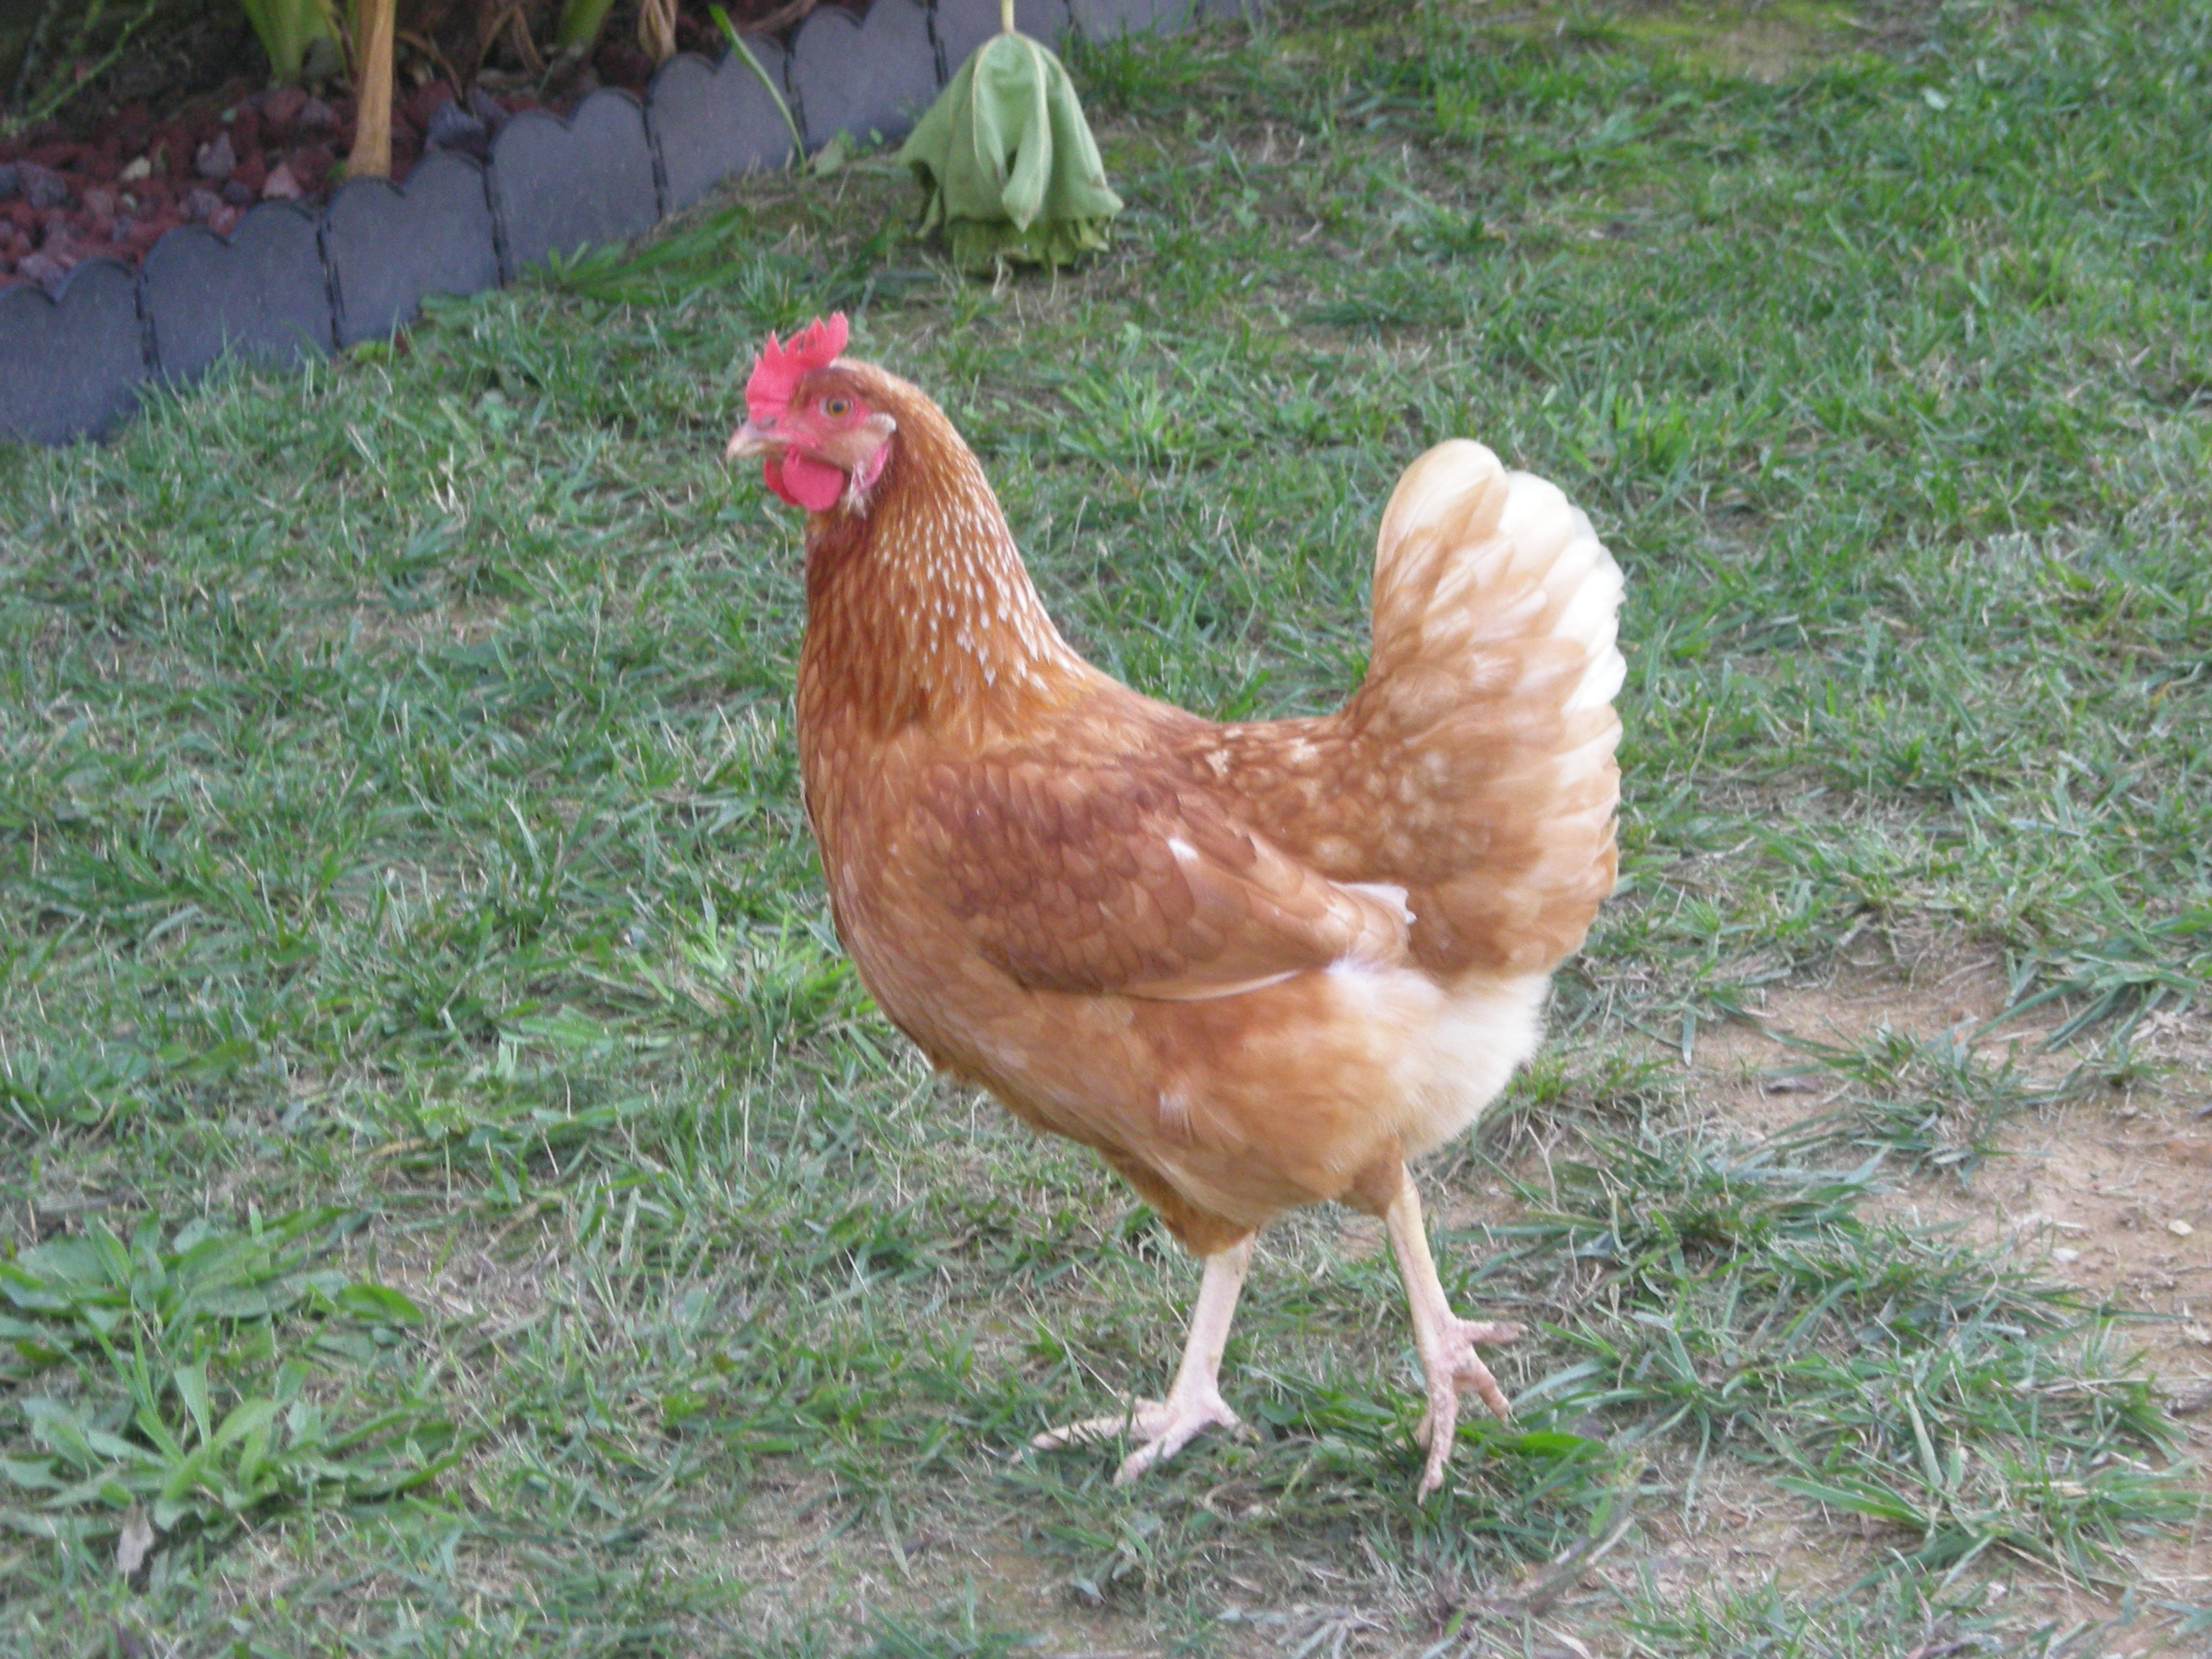 One of the brown hens. We have four and our daughter named the group the Henny Penny fan girls.